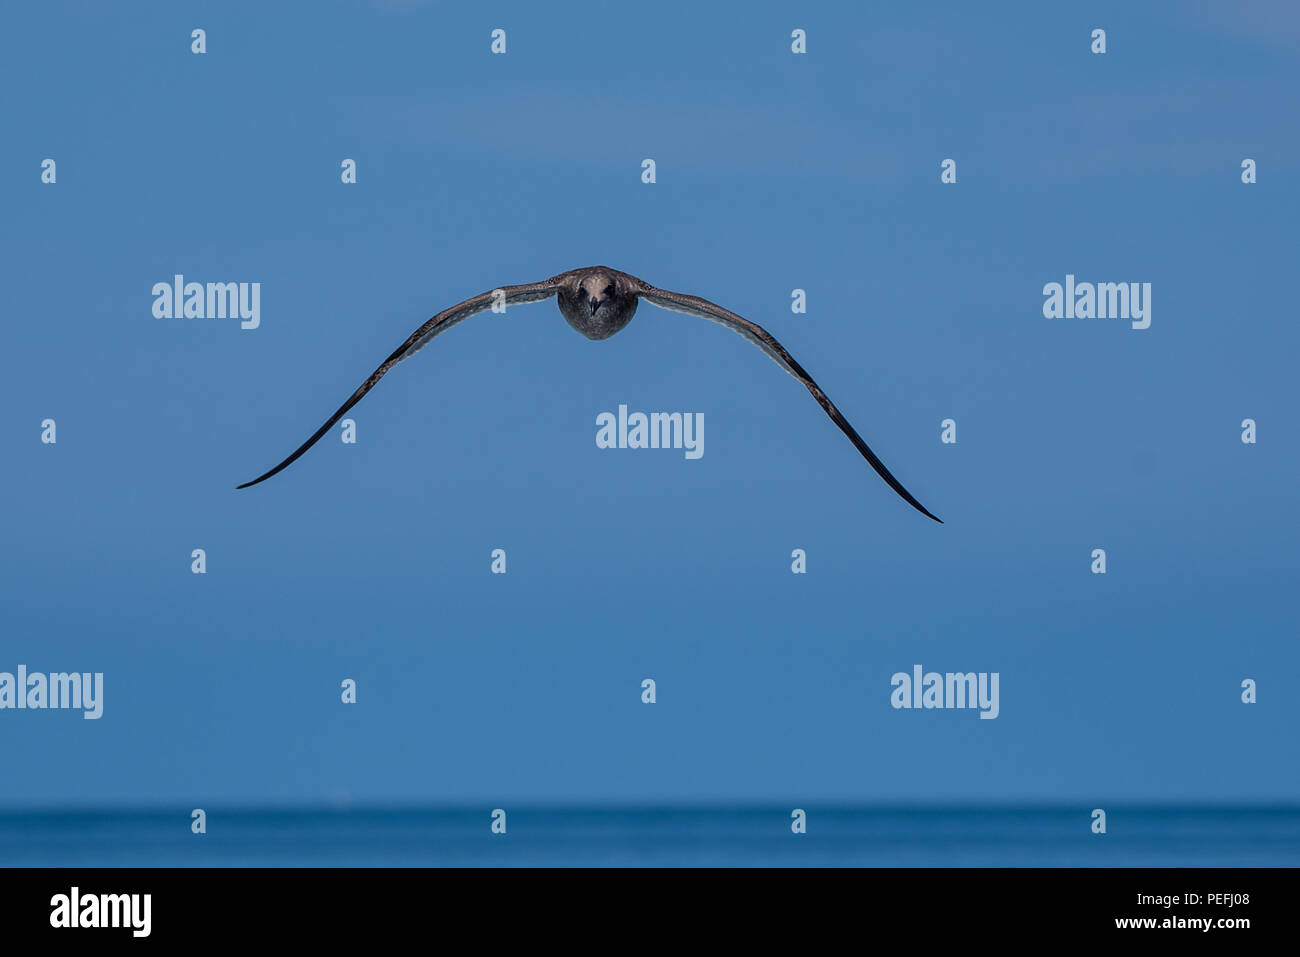 Aerodynamic seagull approaching with wings spread wide and level to the horizon. Stock Photo